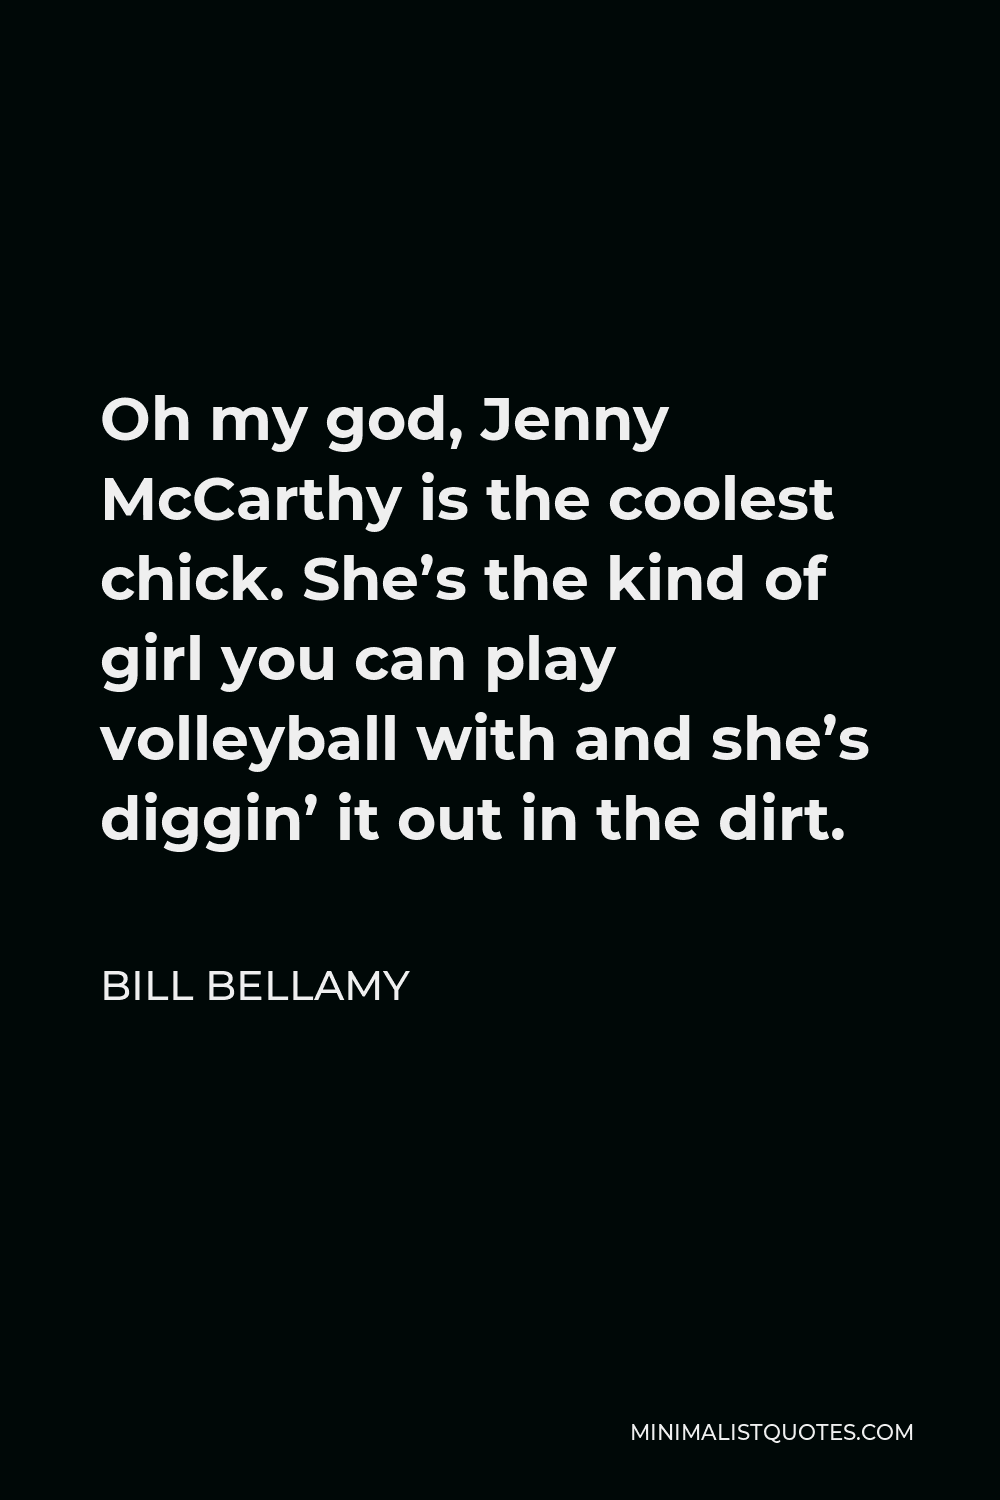 Bill Bellamy Quote - Oh my god, Jenny McCarthy is the coolest chick. She’s the kind of girl you can play volleyball with and she’s diggin’ it out in the dirt.